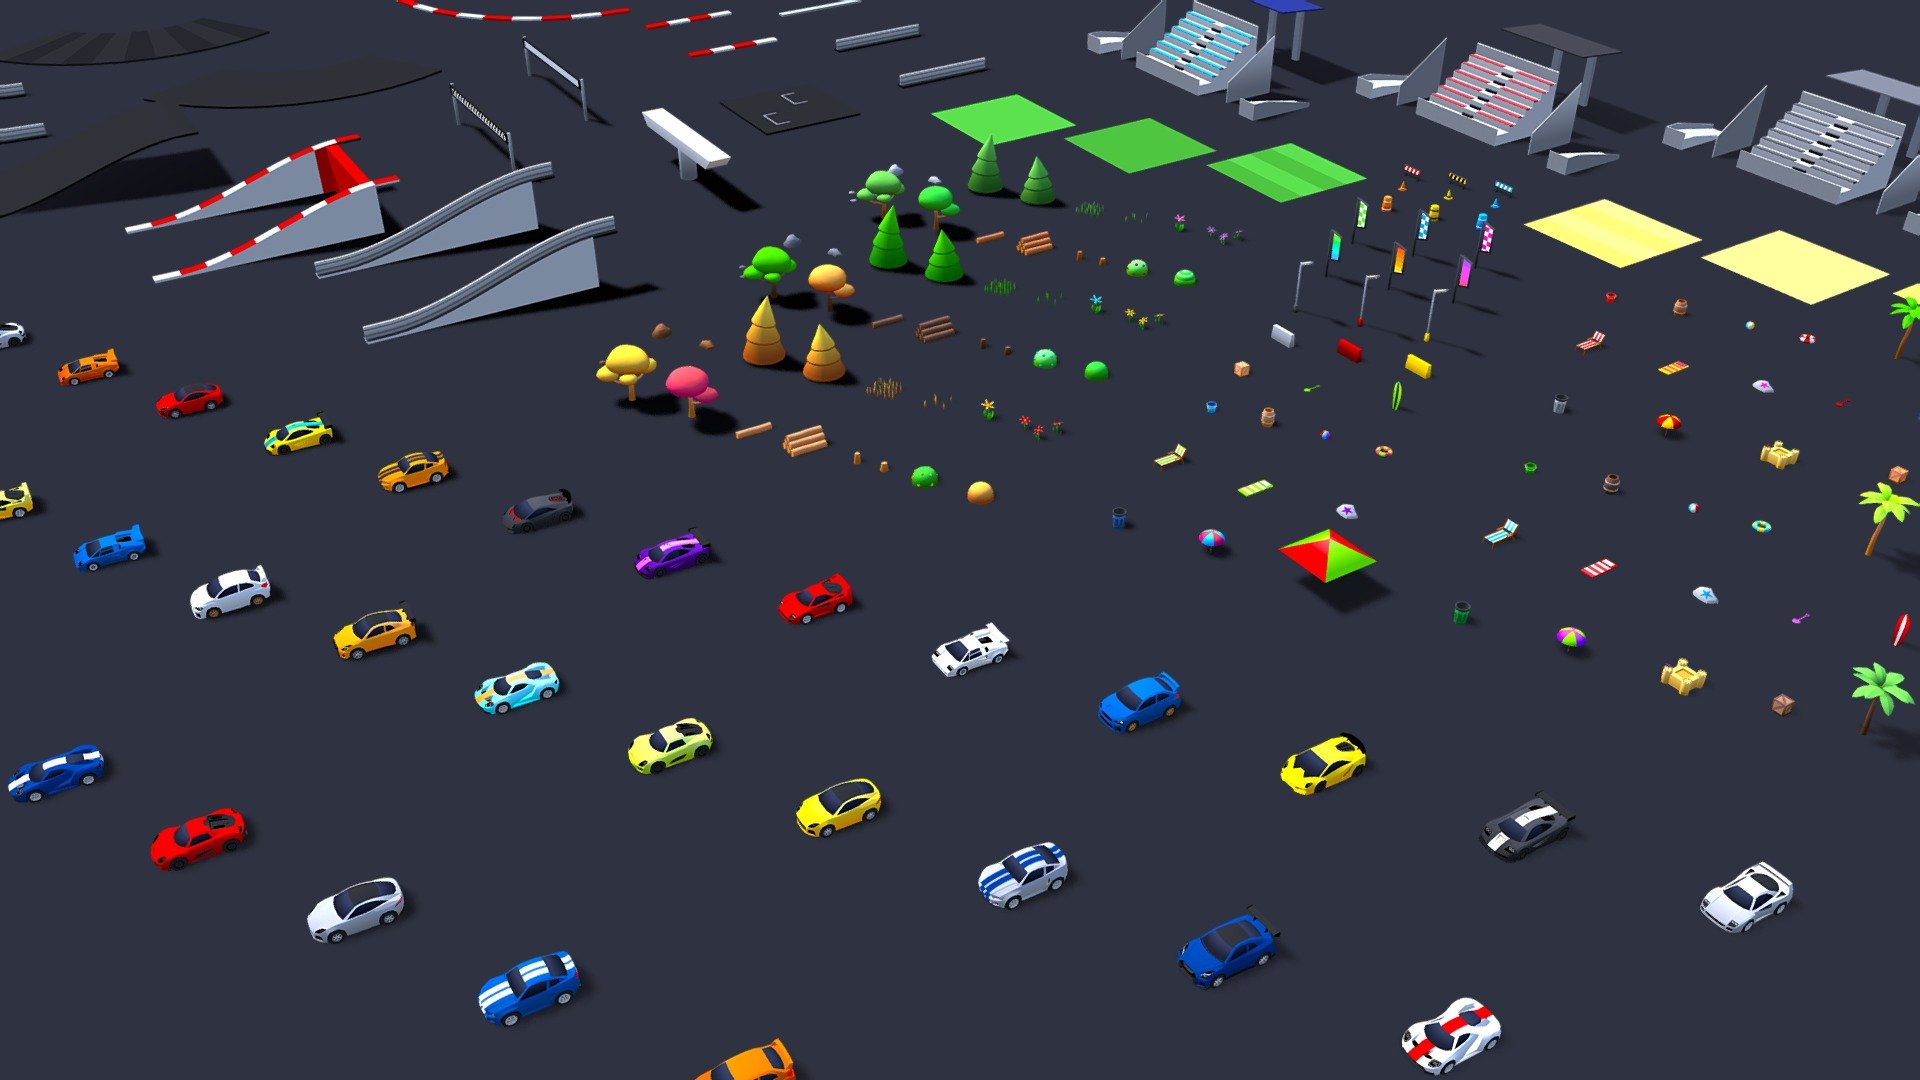 🏁 This is a racing kit that includes cars, modular track parts and decoration props.

RACING VEHICLES (x10).




5 COLORS FOR EACH CAR (50 car variations).

3100 - 3850 triangles per car (wheels included).

Prefabs included.

Cars use 2 materials (texture atlas of 512px * 512px).

Cartoon design.

RACING TRACK (x16).




Includes roads, curves, hills, apex sections and more. 2 colors for each model.

1 material.

Texture atlas (1024px * 1024px)

TRACK PROPS (x8).




Includes cones, flags, bleachers and more. 3 colors for each model (24 model variations).

1 material (2 in some models).

Texture atlas (1024px * 1024px)

PROPS: FOREST (x18).




Includes bushes, trees, flowers, rocks and more. 3 colors for each model (54 model variations).

1 material.

Texture atlas (1024px * 1024px)

PROPS: BEACH (x17).

Includes palms, umbrellas, towels and more. 3 colors for each model (51 model variations).
* 1 material.
* Texture atlas (1024px * 1024px) - CARS - Cute Racing Kit - Buy Royalty Free 3D model by SunsetStudio 3d model